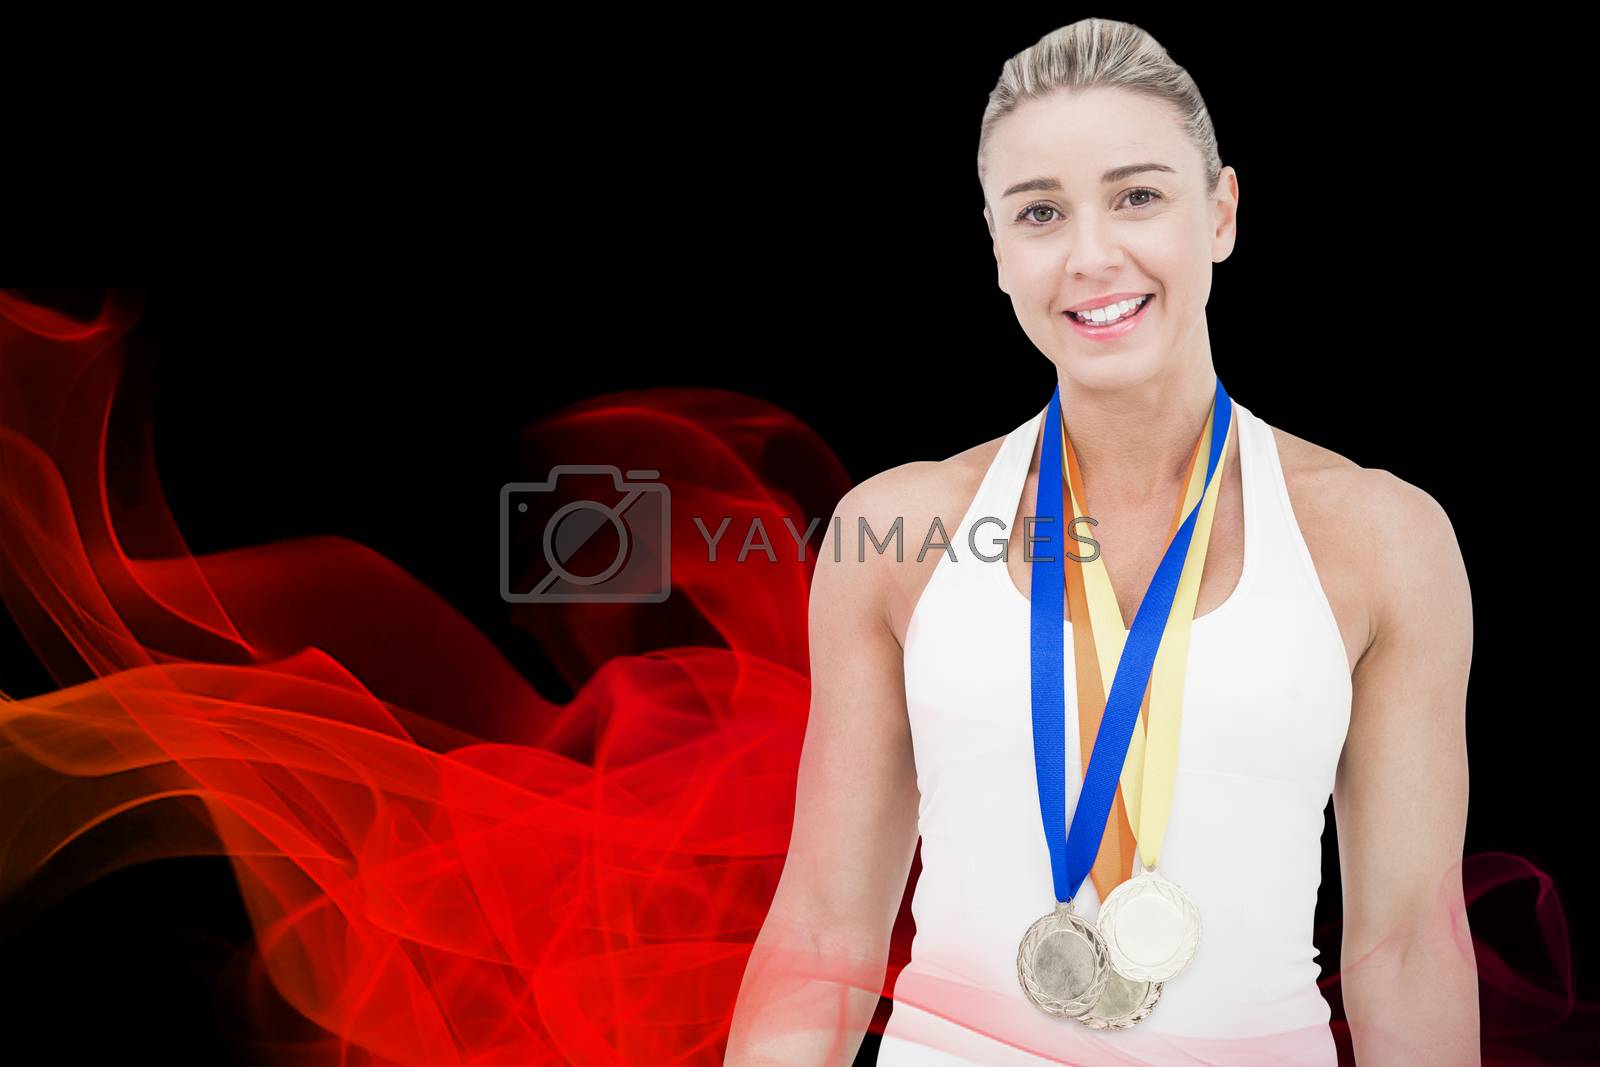 Royalty free image of Composite image of female athlete wearing medals by Wavebreakmedia